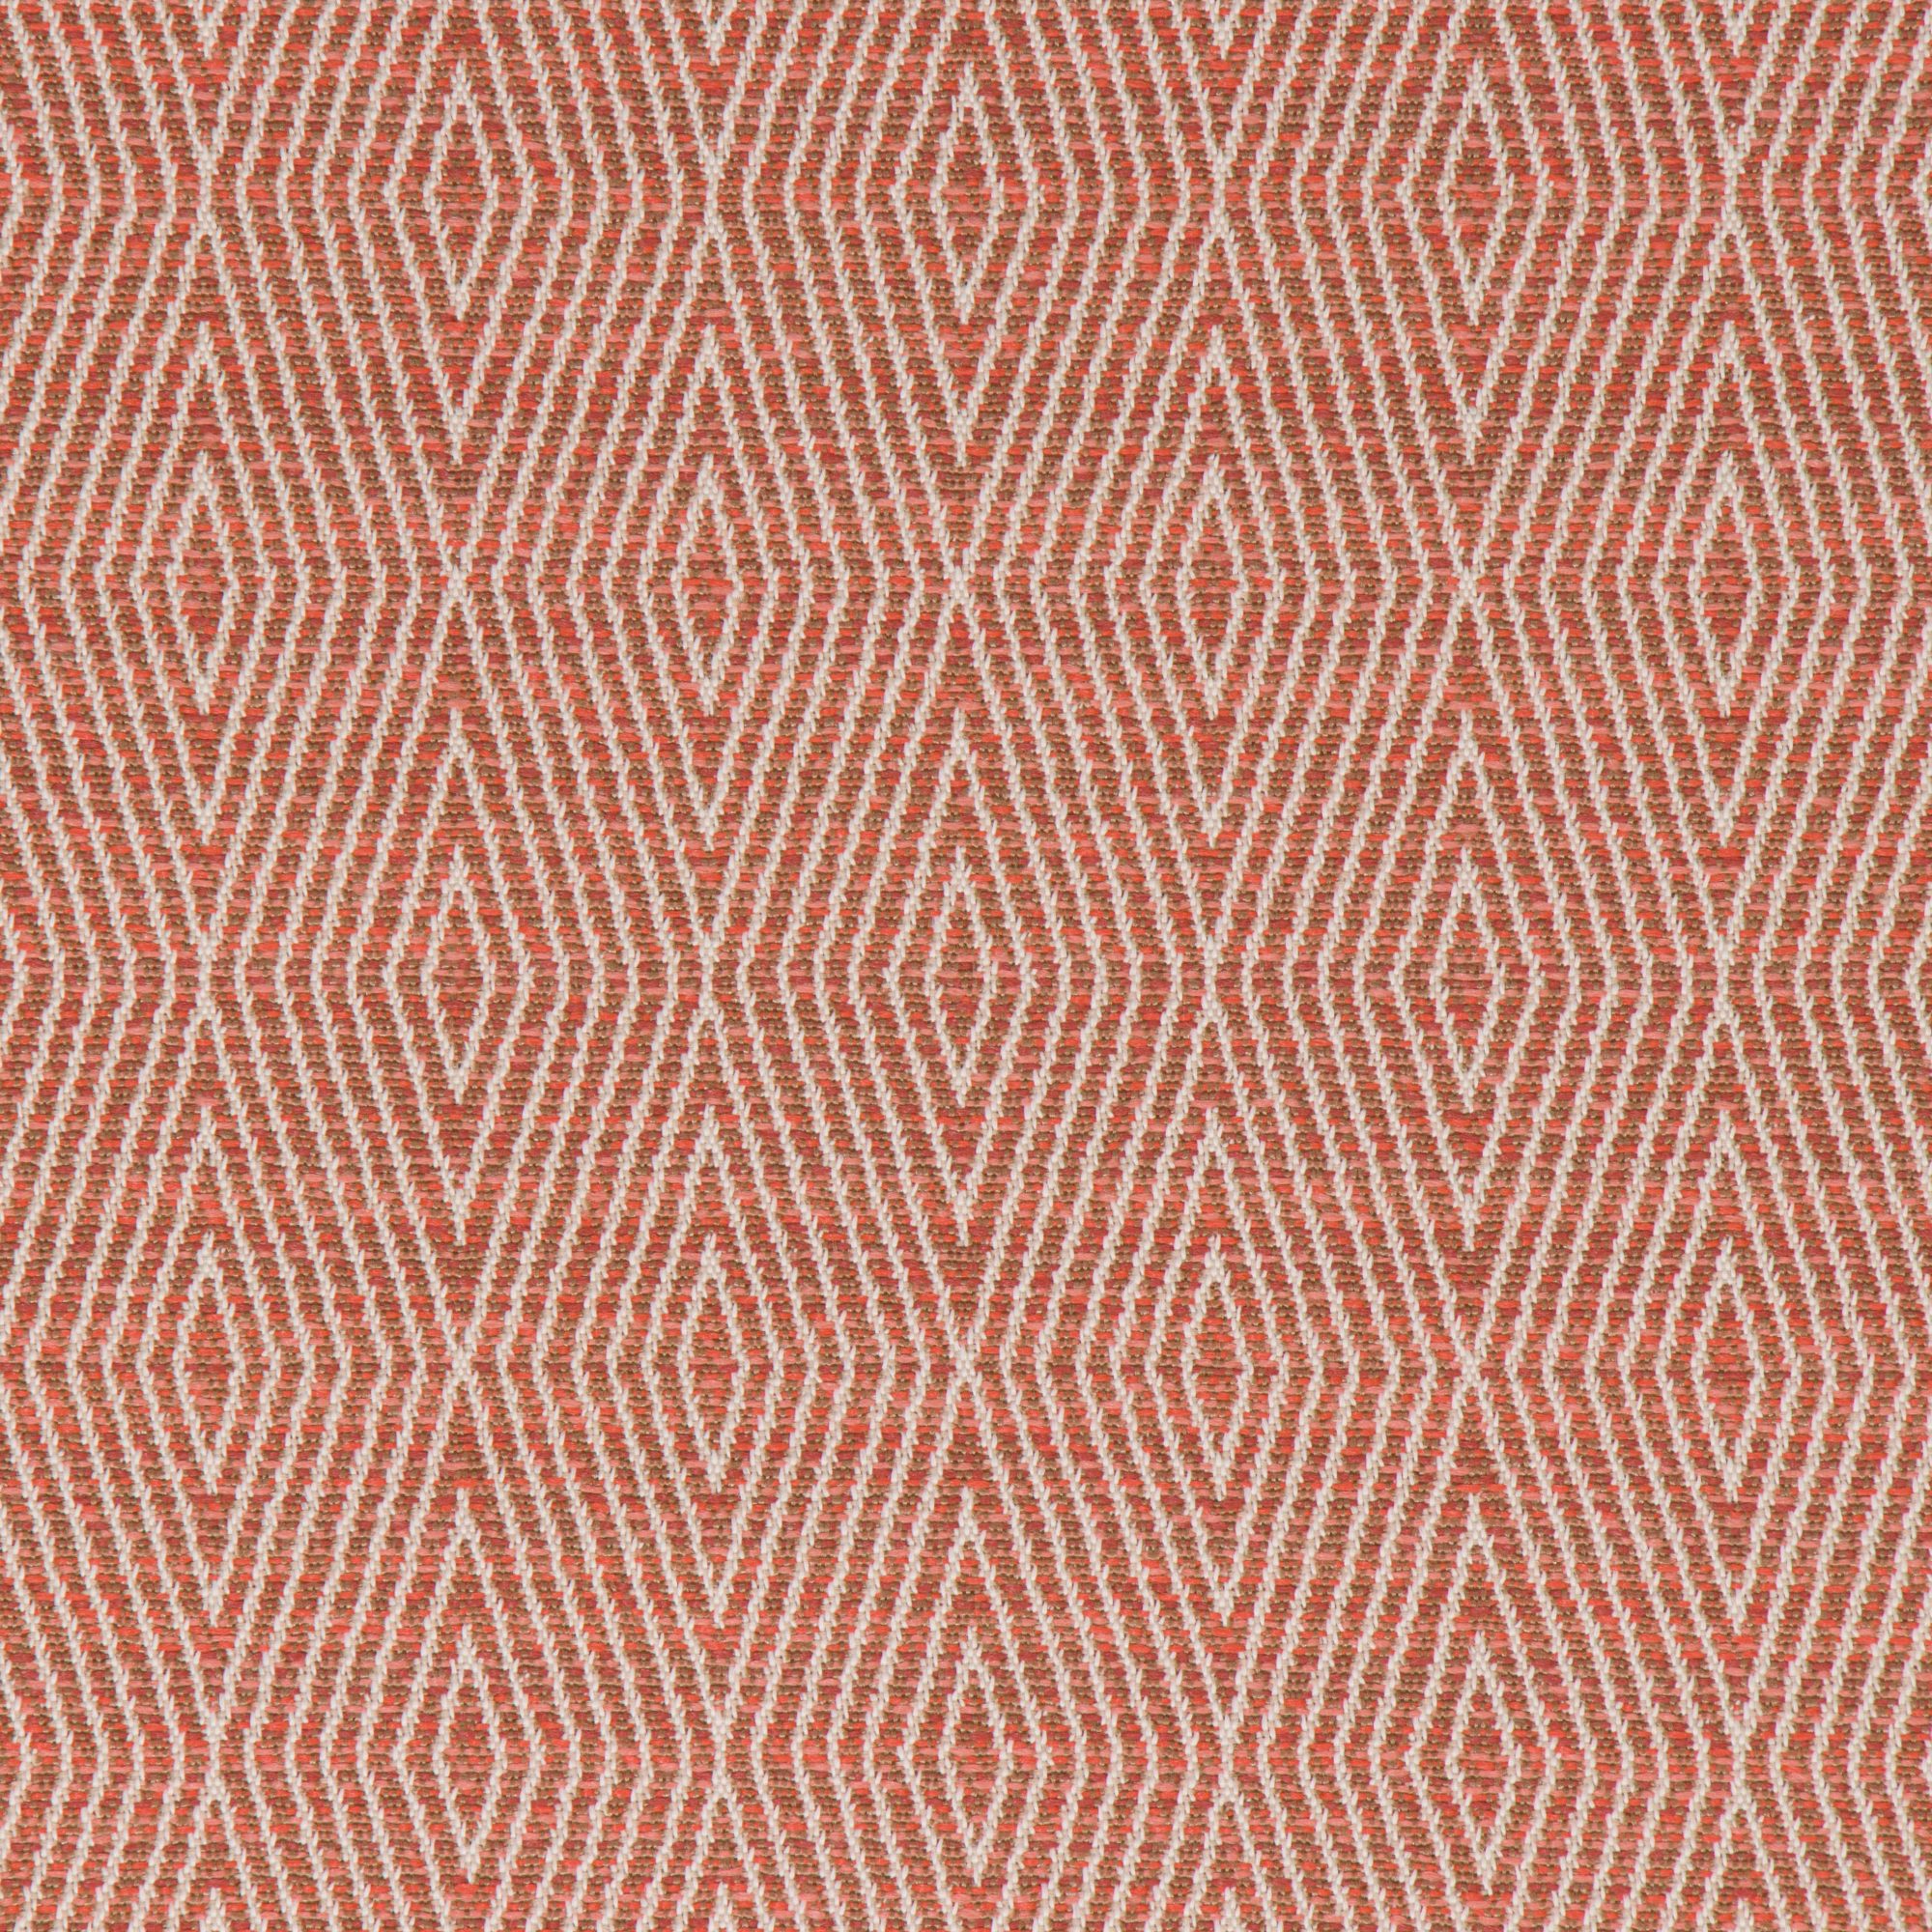 Bella Dura and Bella Dura Home's fabric in the pattern Dart and color Terracotta.